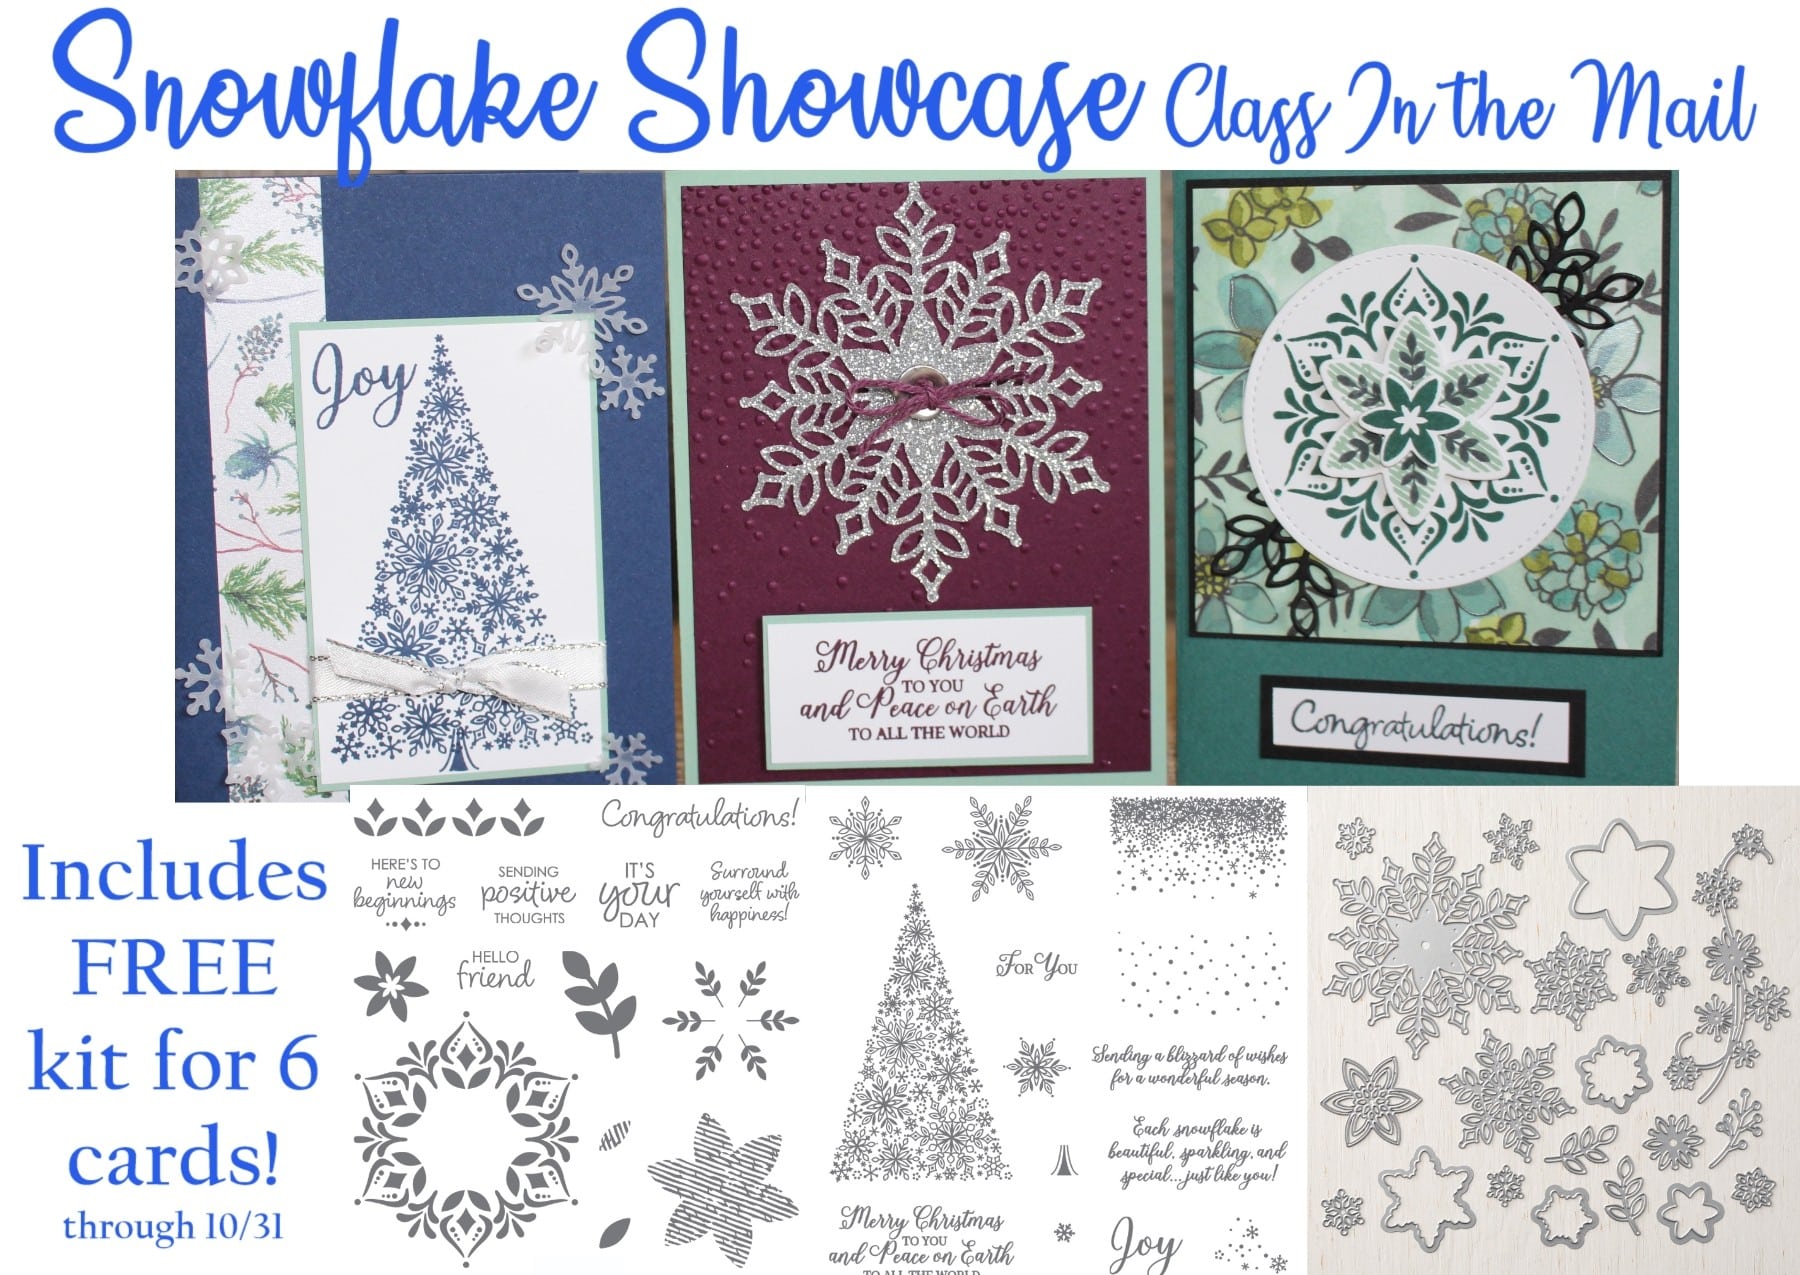 Introducing the Stampin’ Up! Snowflake Showcase Class in the Mail!